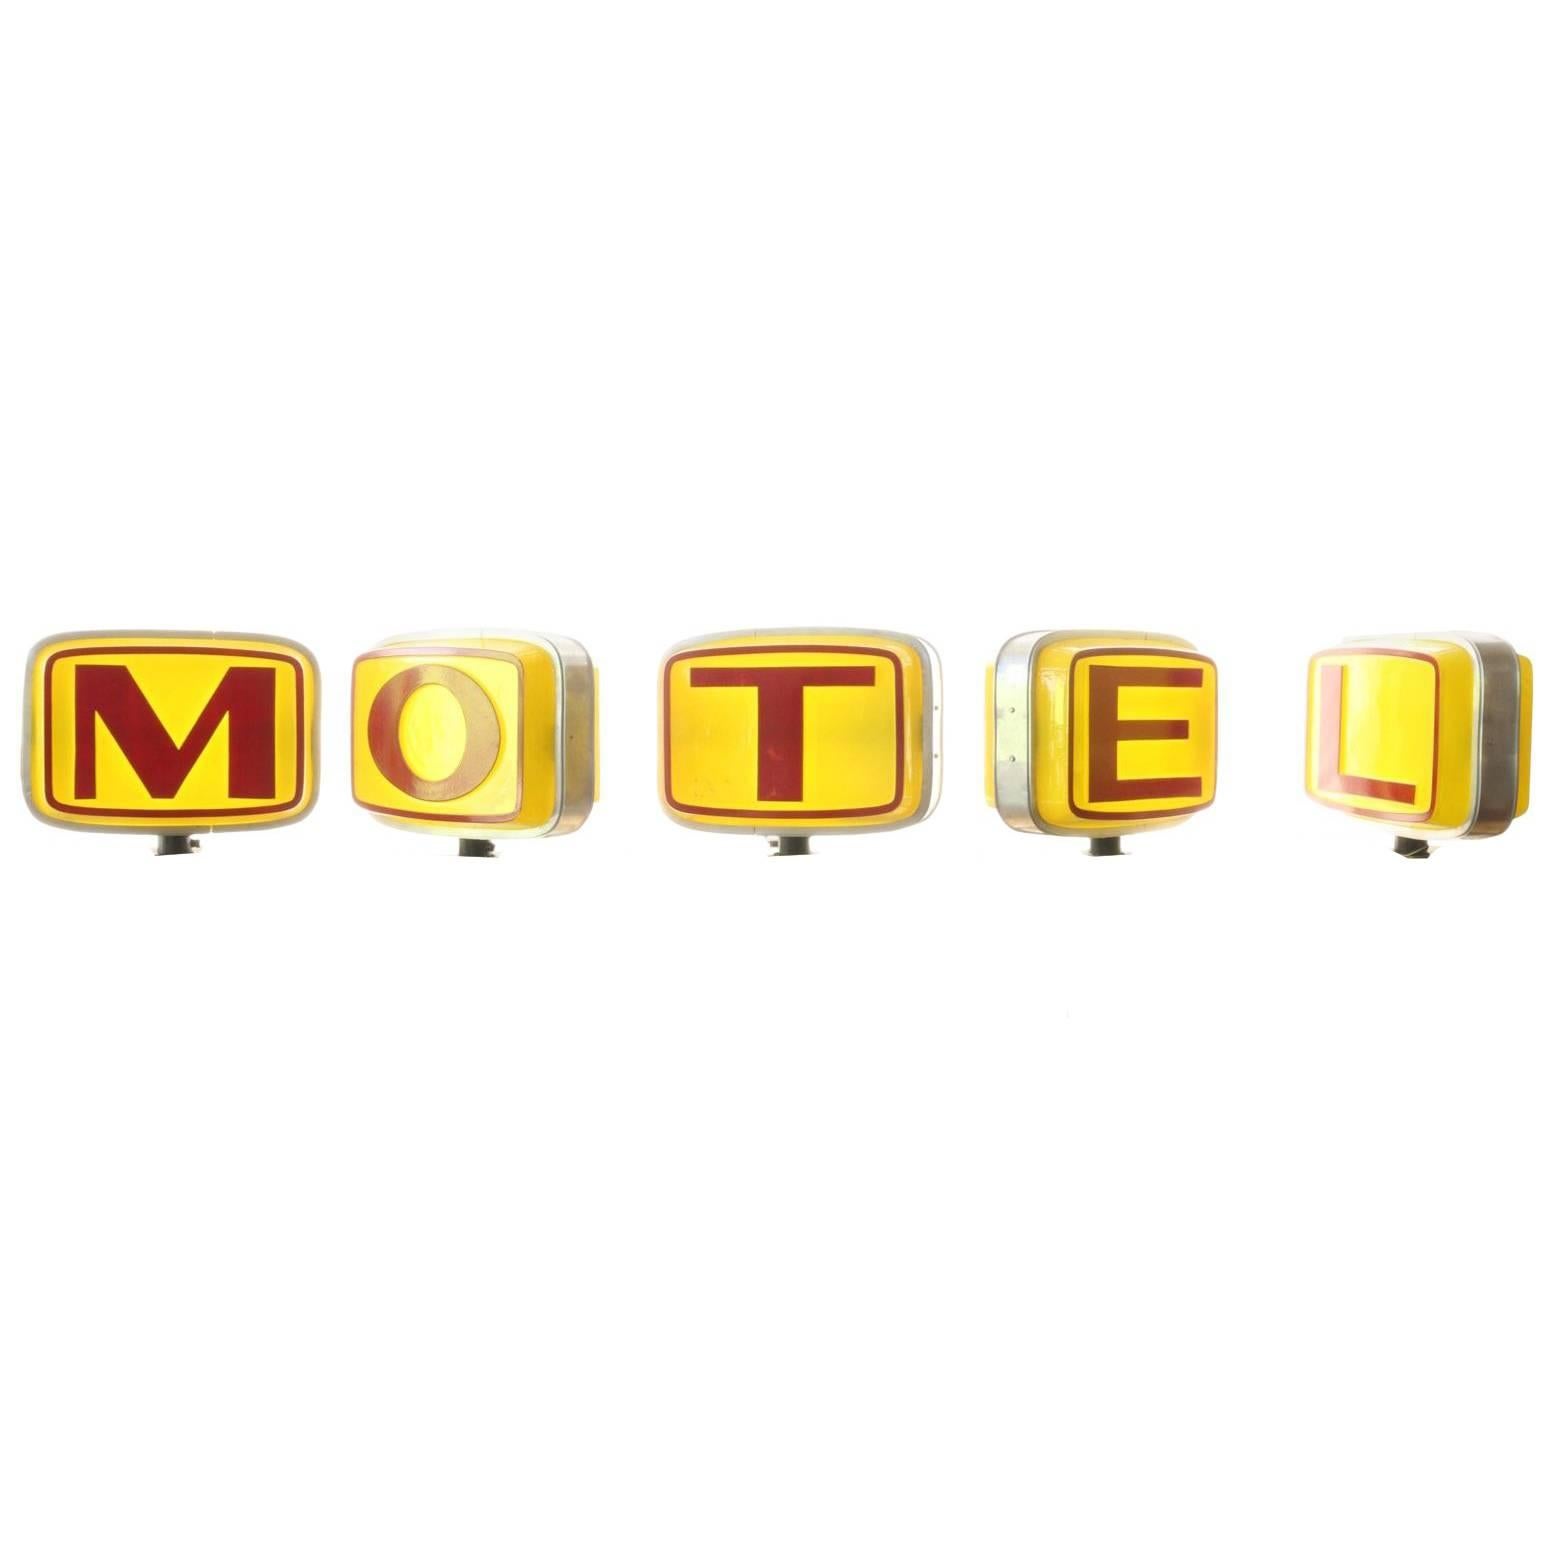 Motel Sign 1970s Indoor Outdoor Double Sided Five-Piece Illuminated